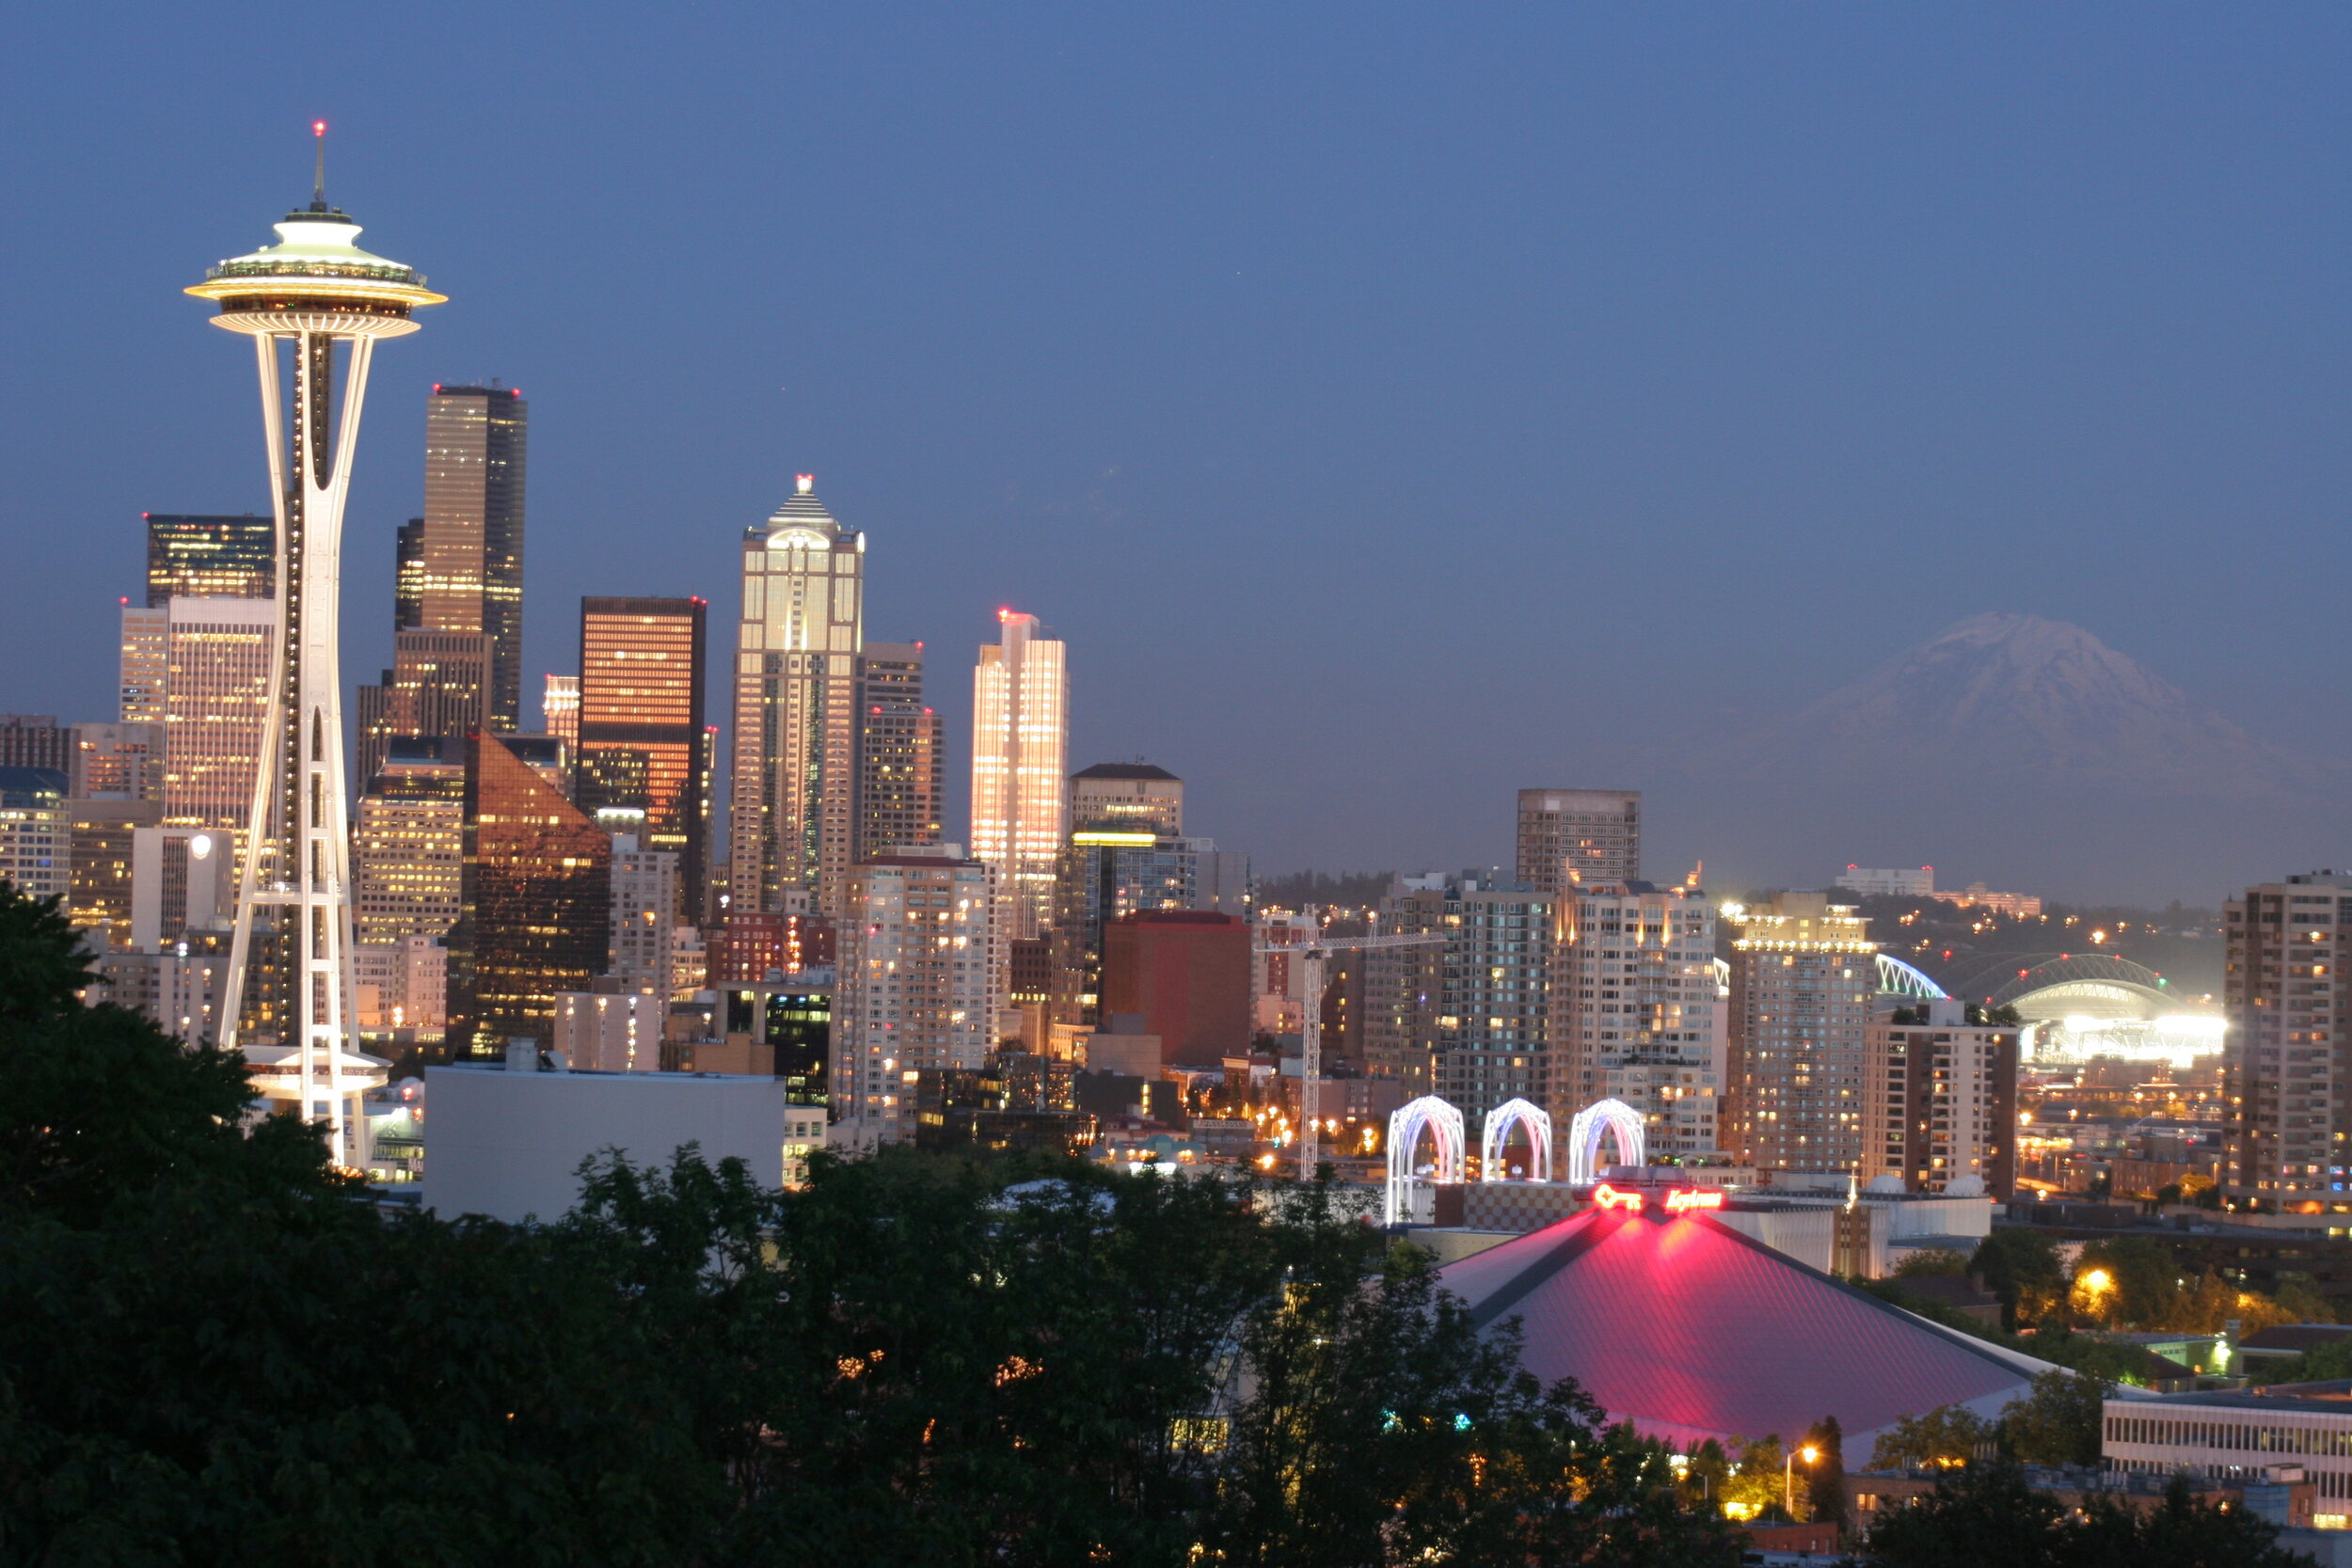 The View from Kerry Park in Queen Anne neighborhood - Seattle, WA